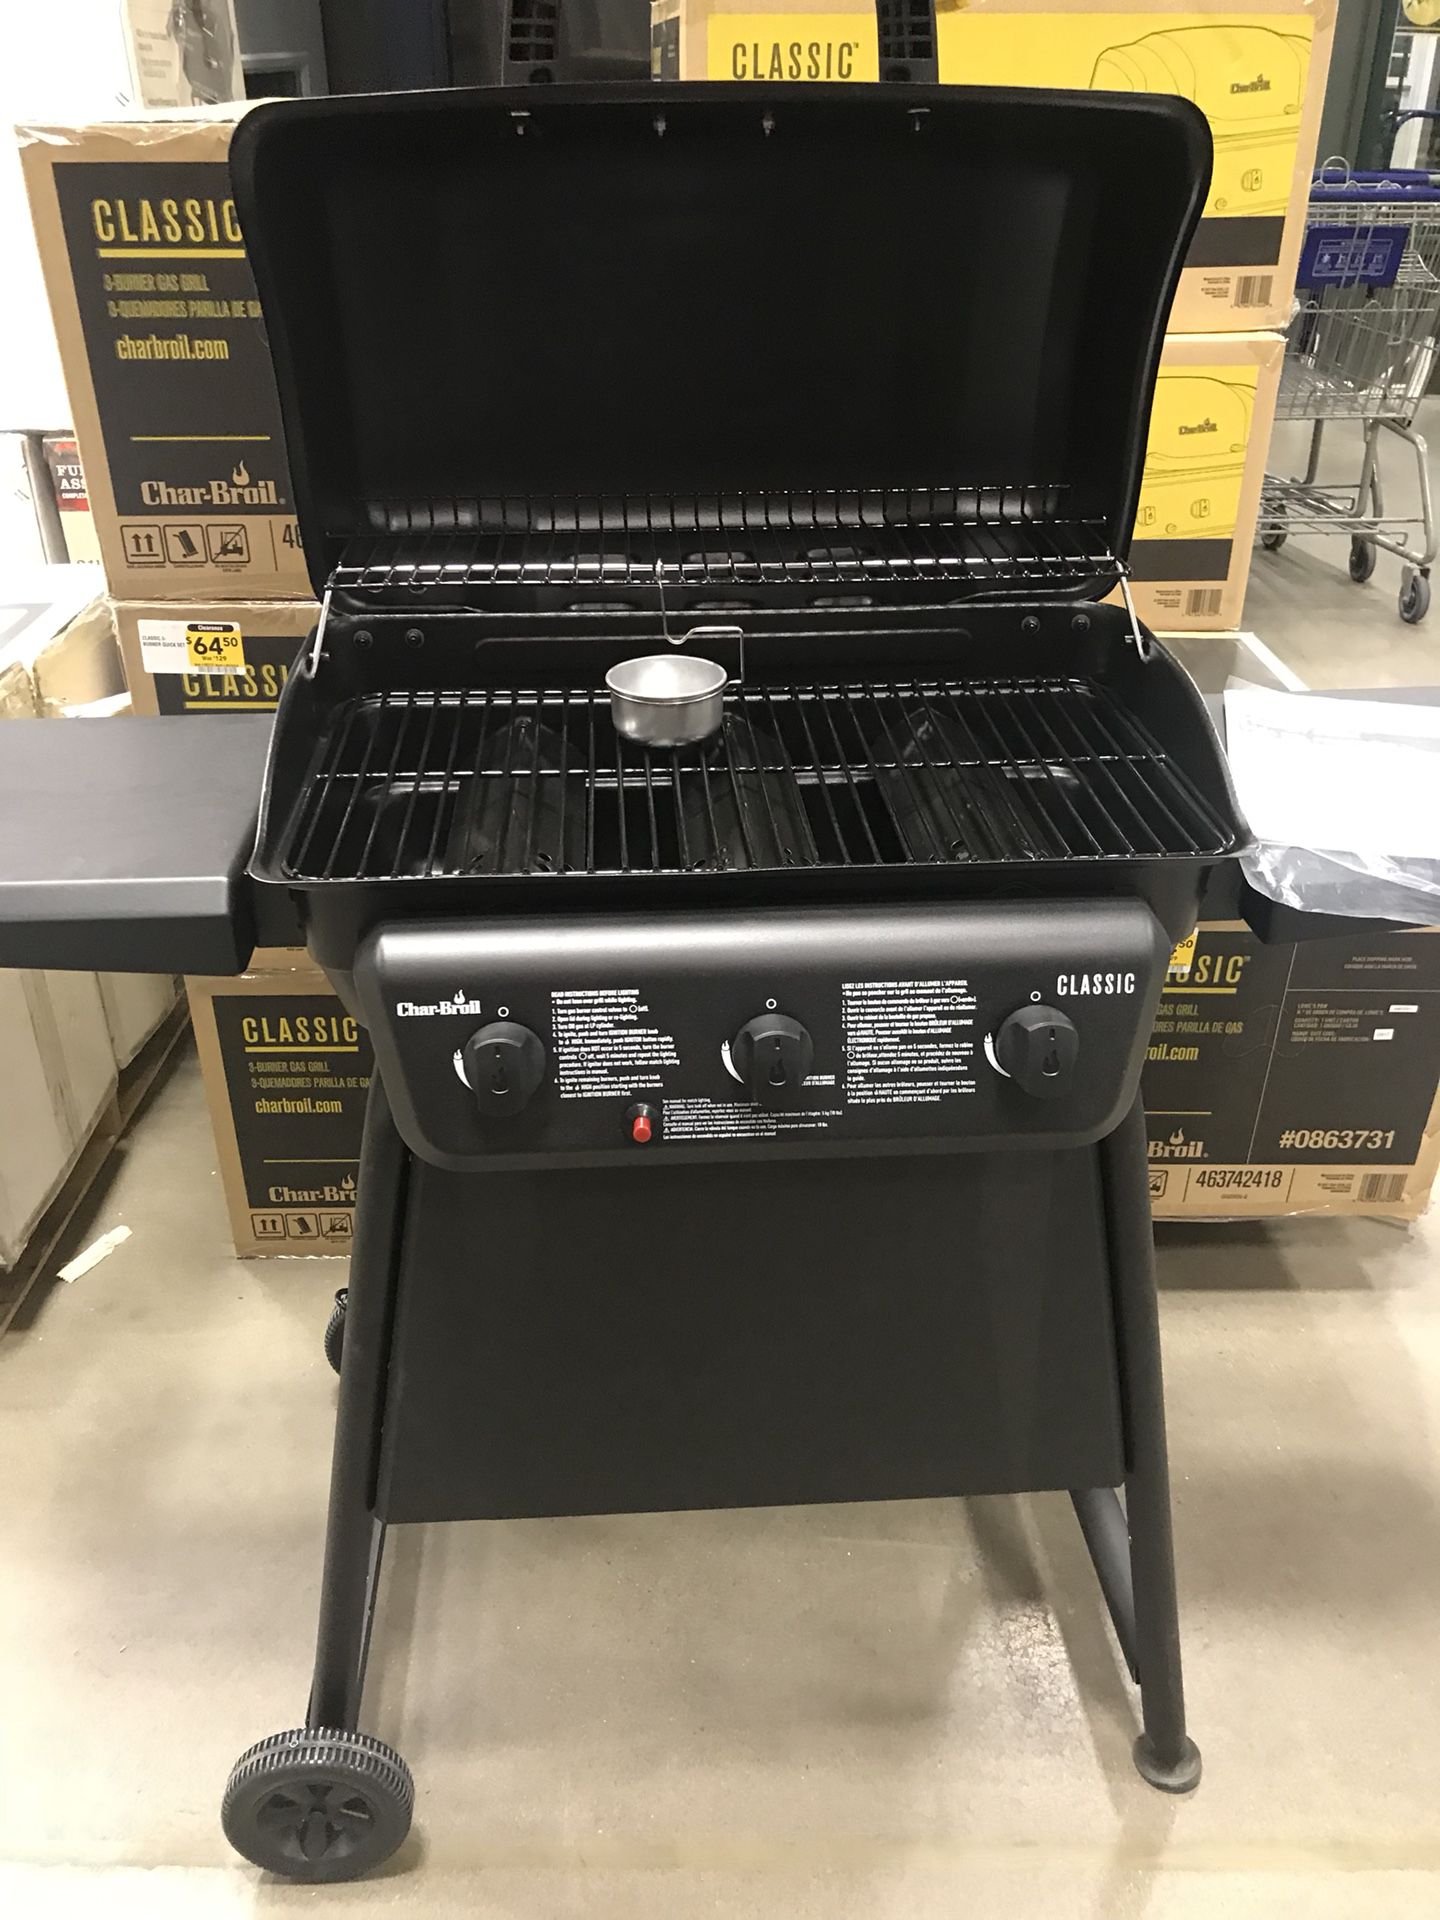 New Gas Grill